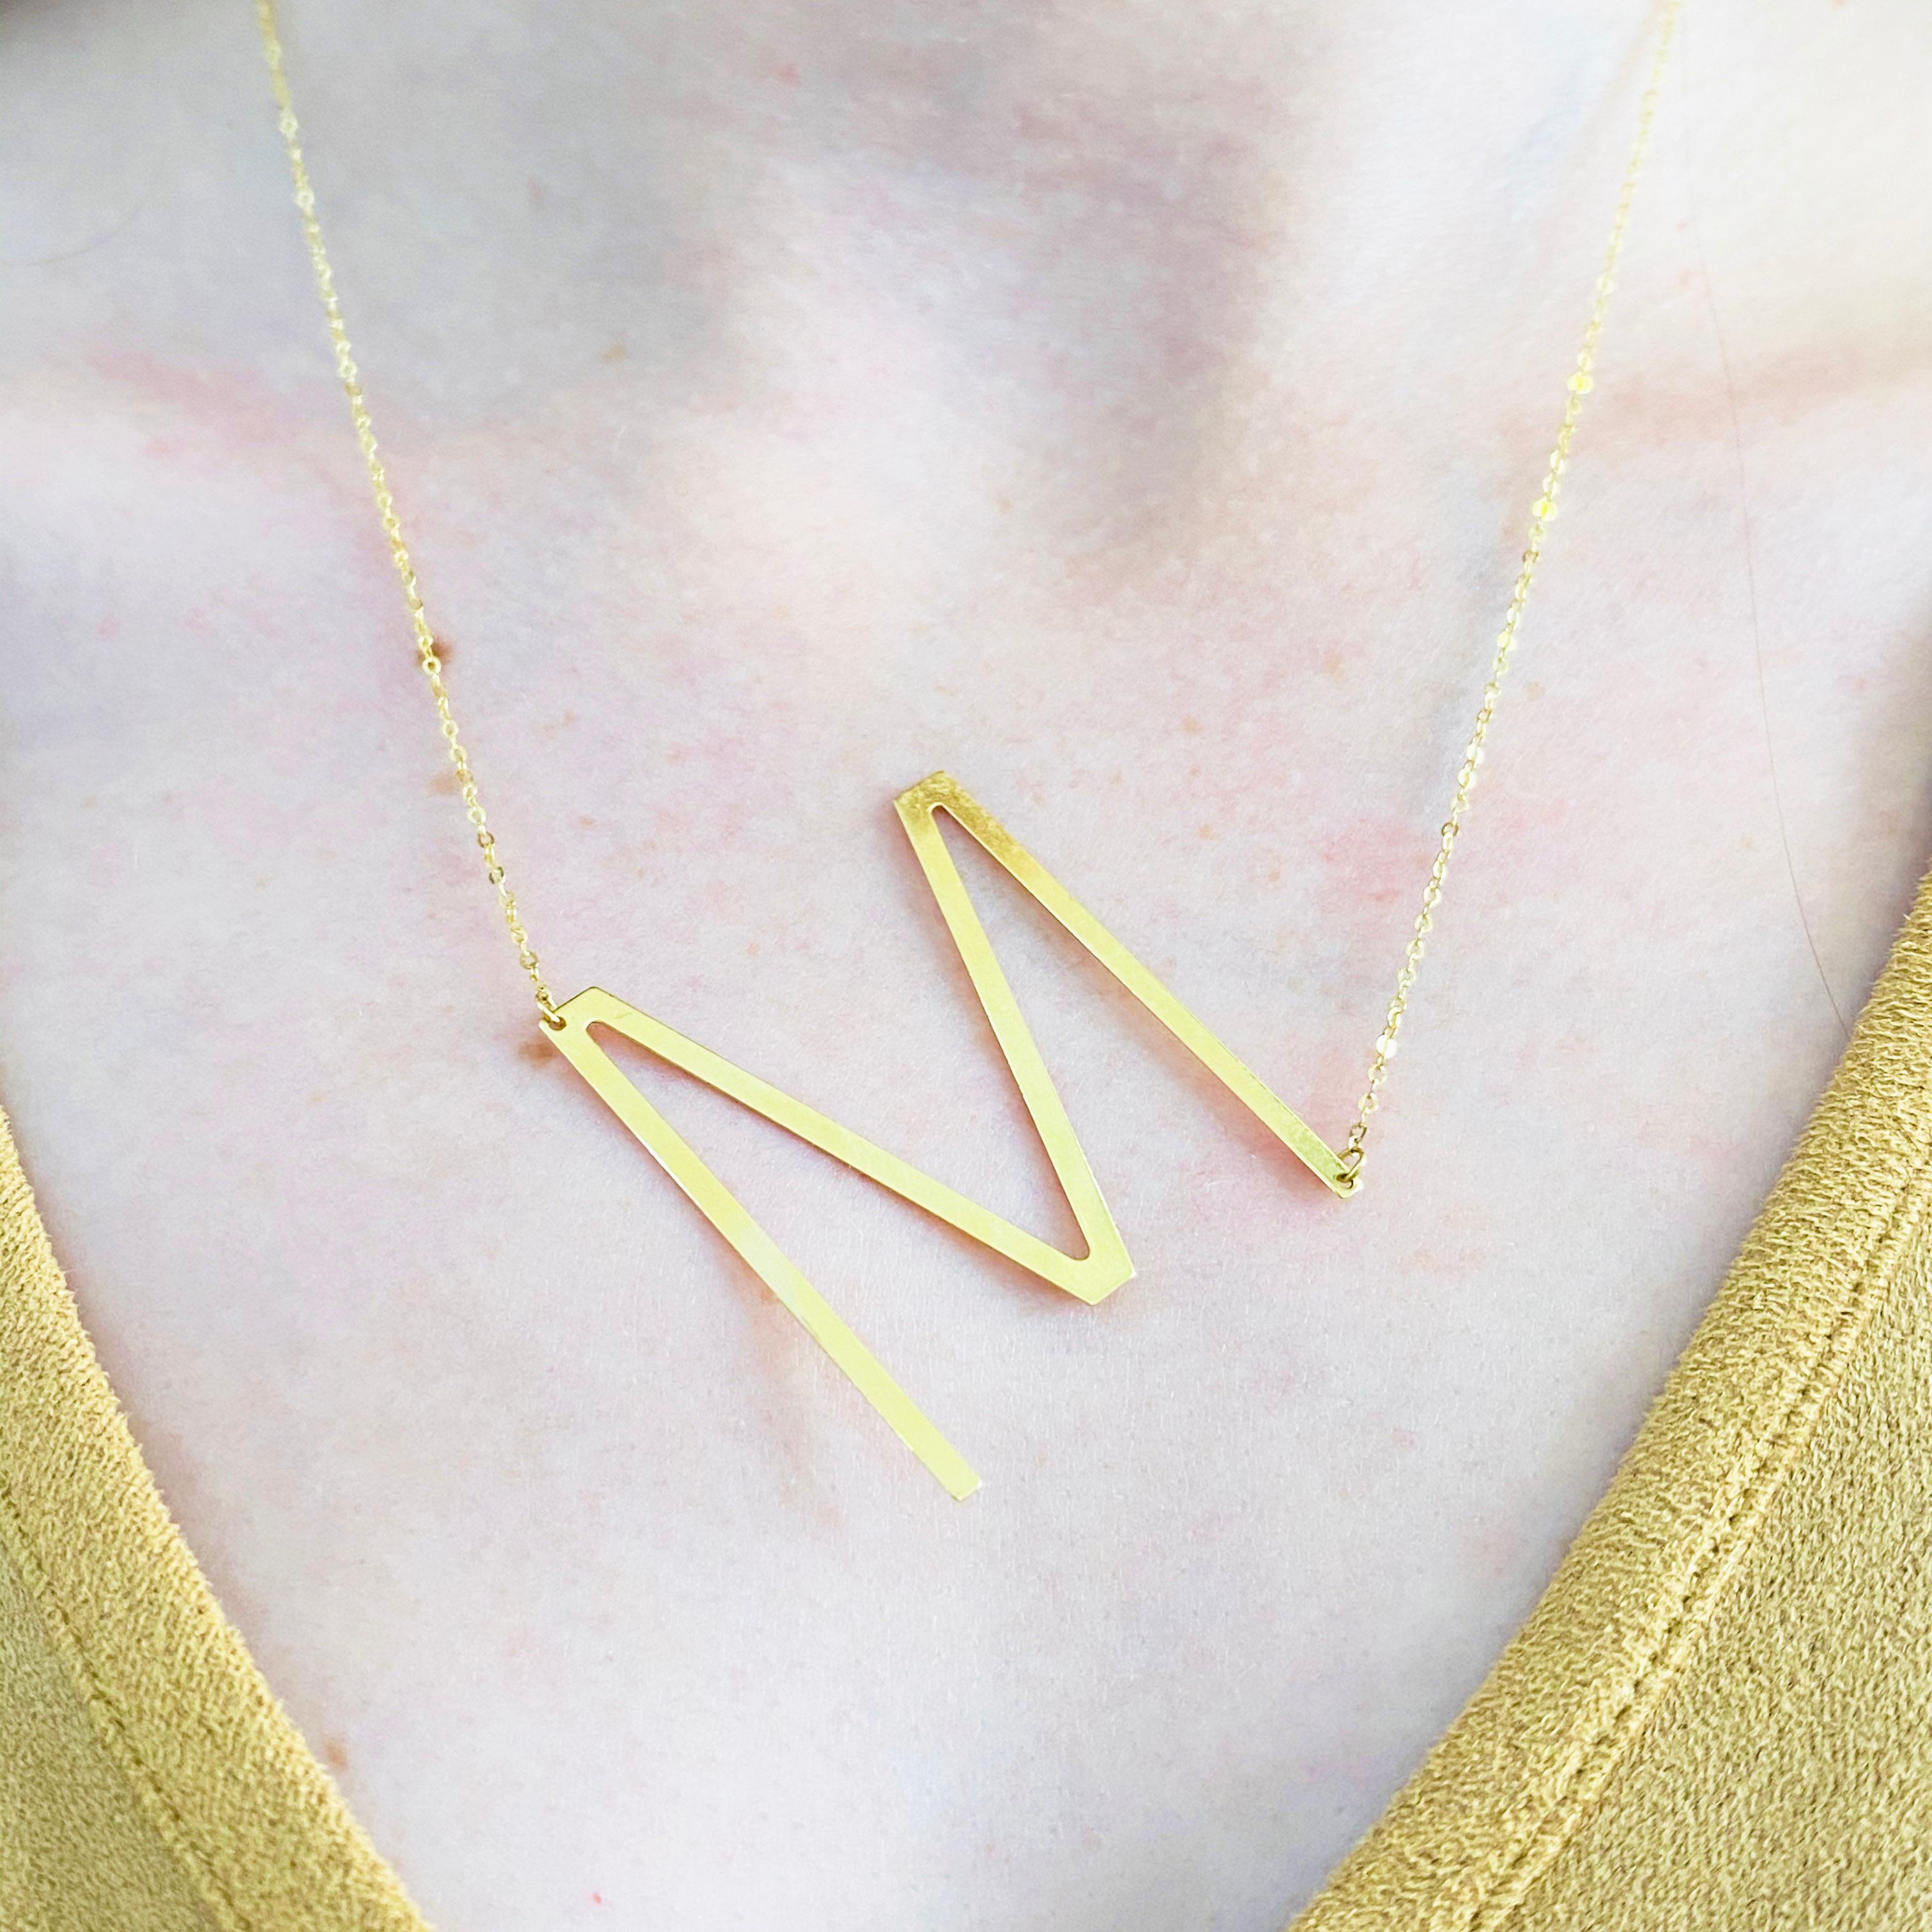 Initials, personalized and monogram from A to Z! This gorgeous 14k yellow gold initial necklace can be made with any initial and is the perfect mix between classic and fashion! This necklace is very fashionable and can add a touch of style to any